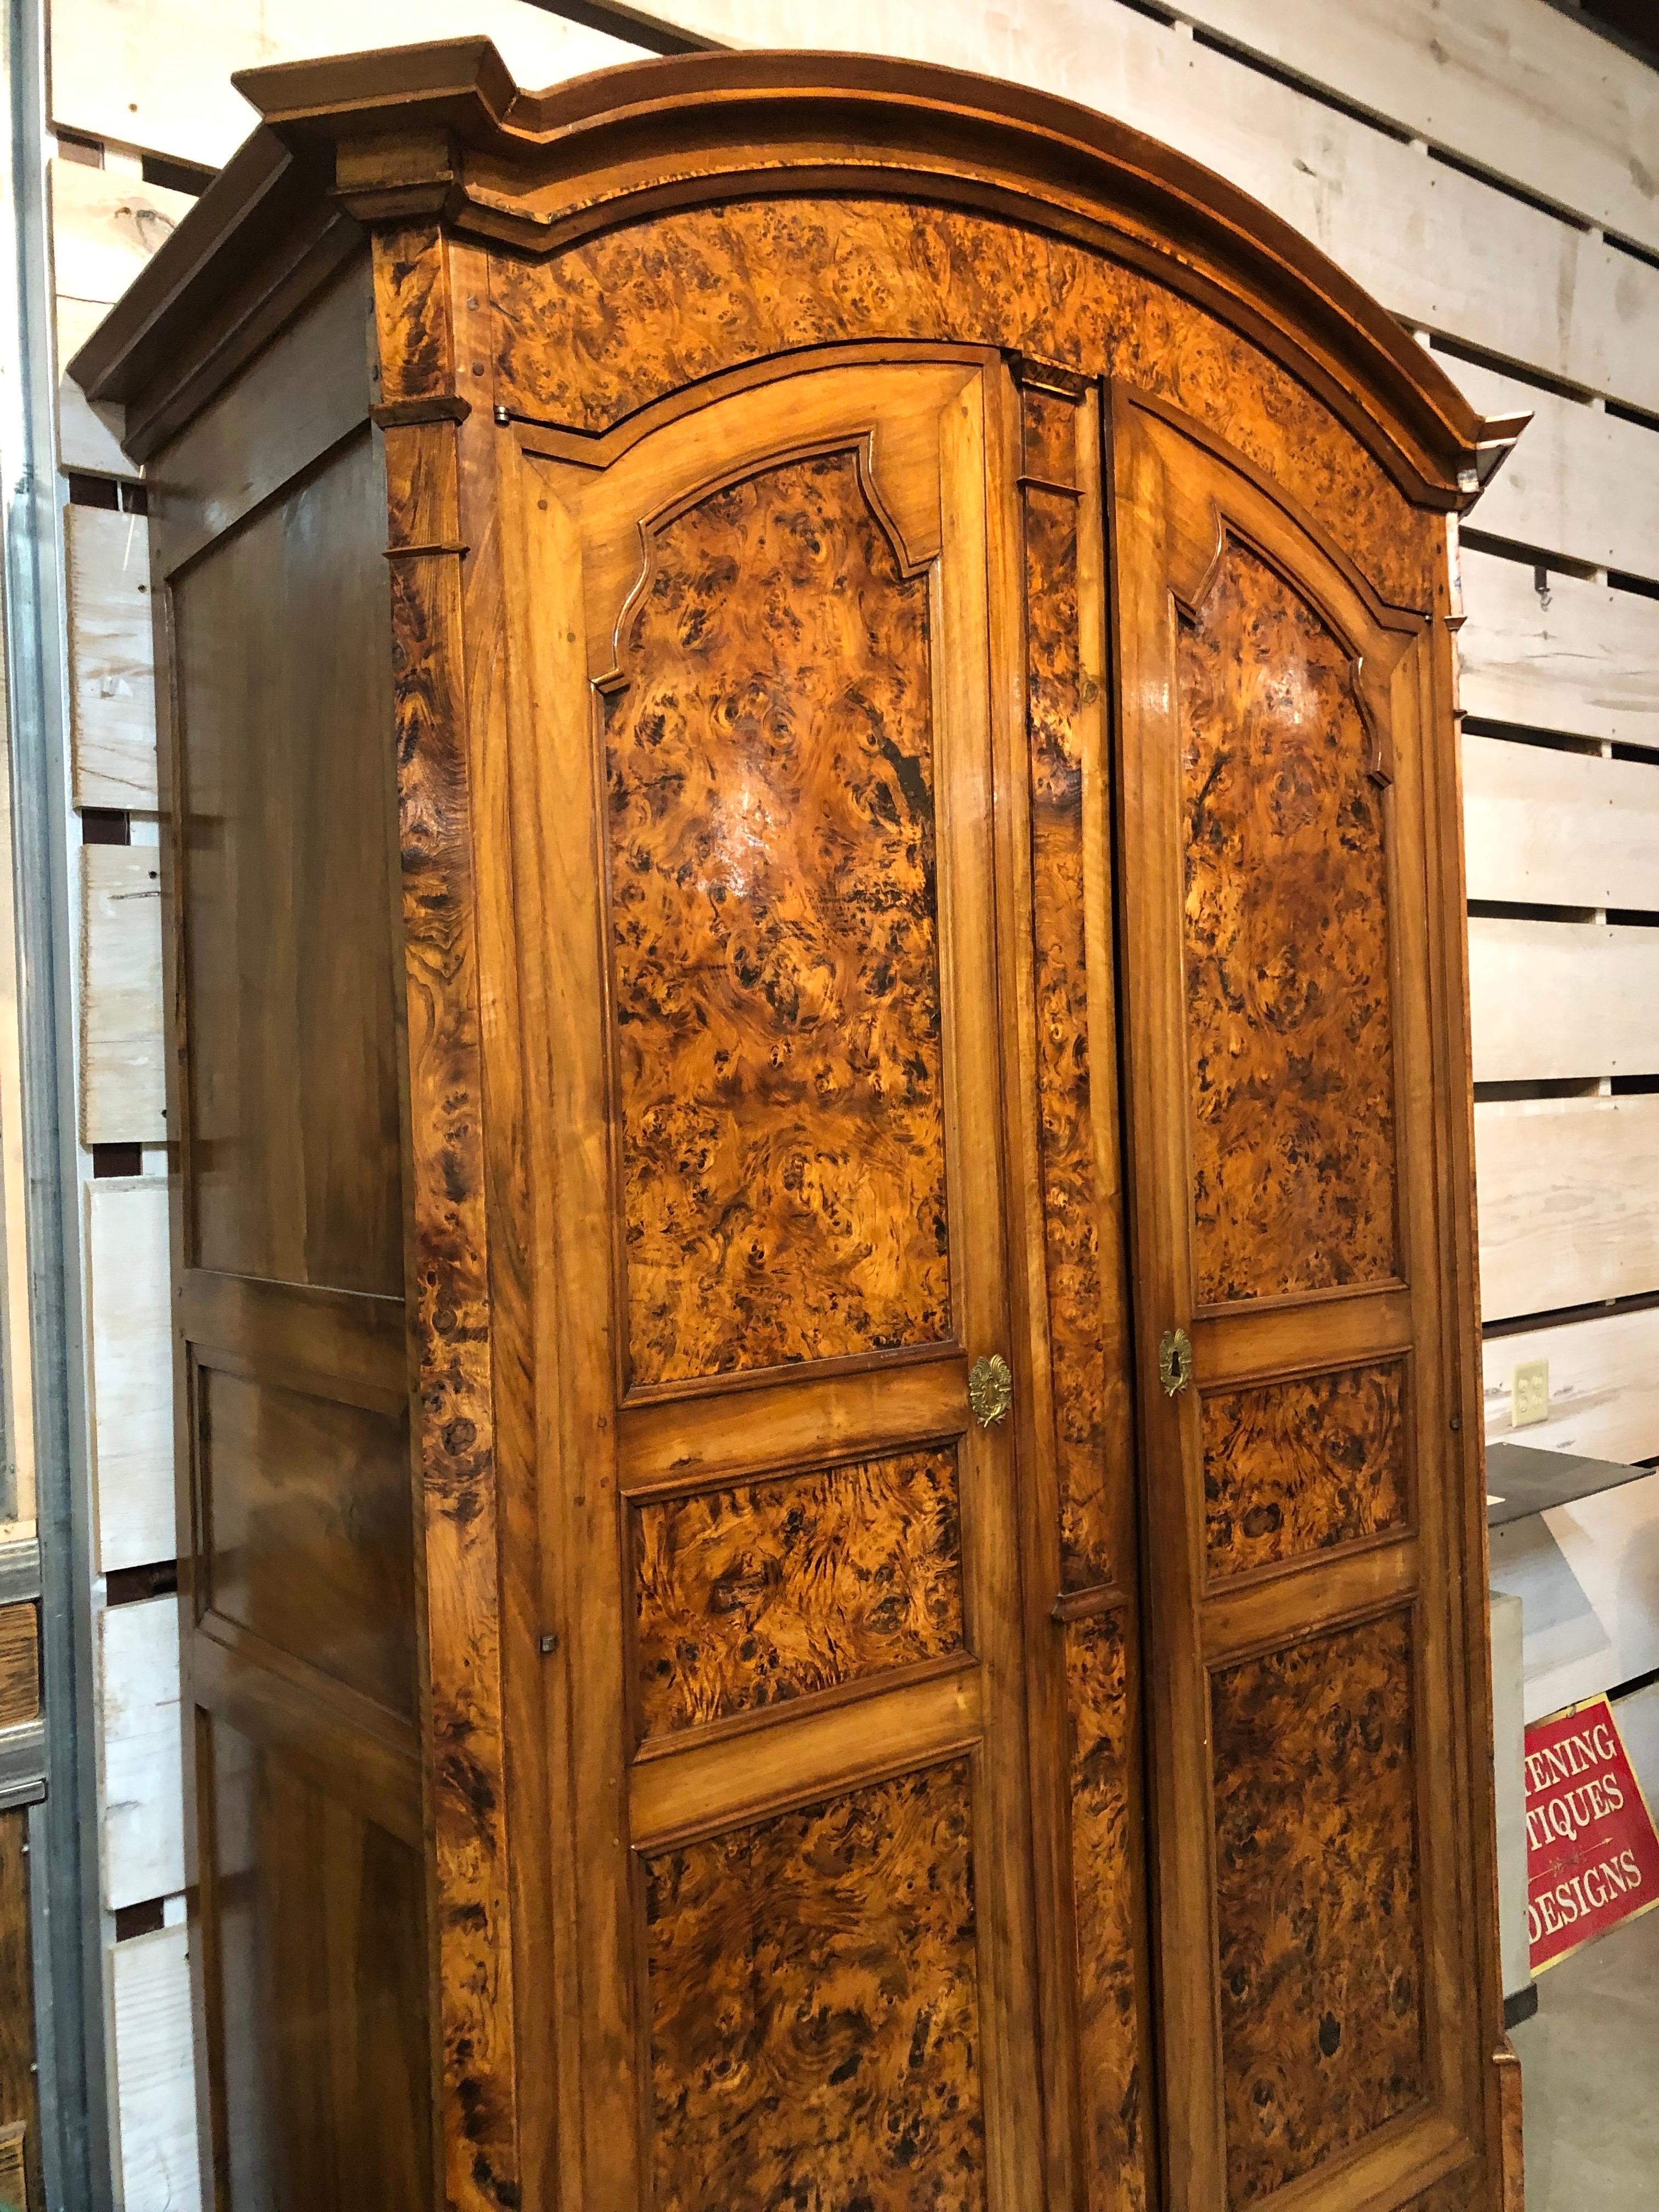 Extraordinary Louis XVI style French provincial armoire made of beautiful burled ash, deep rich patination with remarkably figured ash and walnut. Two large doors open to reveal interior wood details and plenty of storage space. Excellent condition,